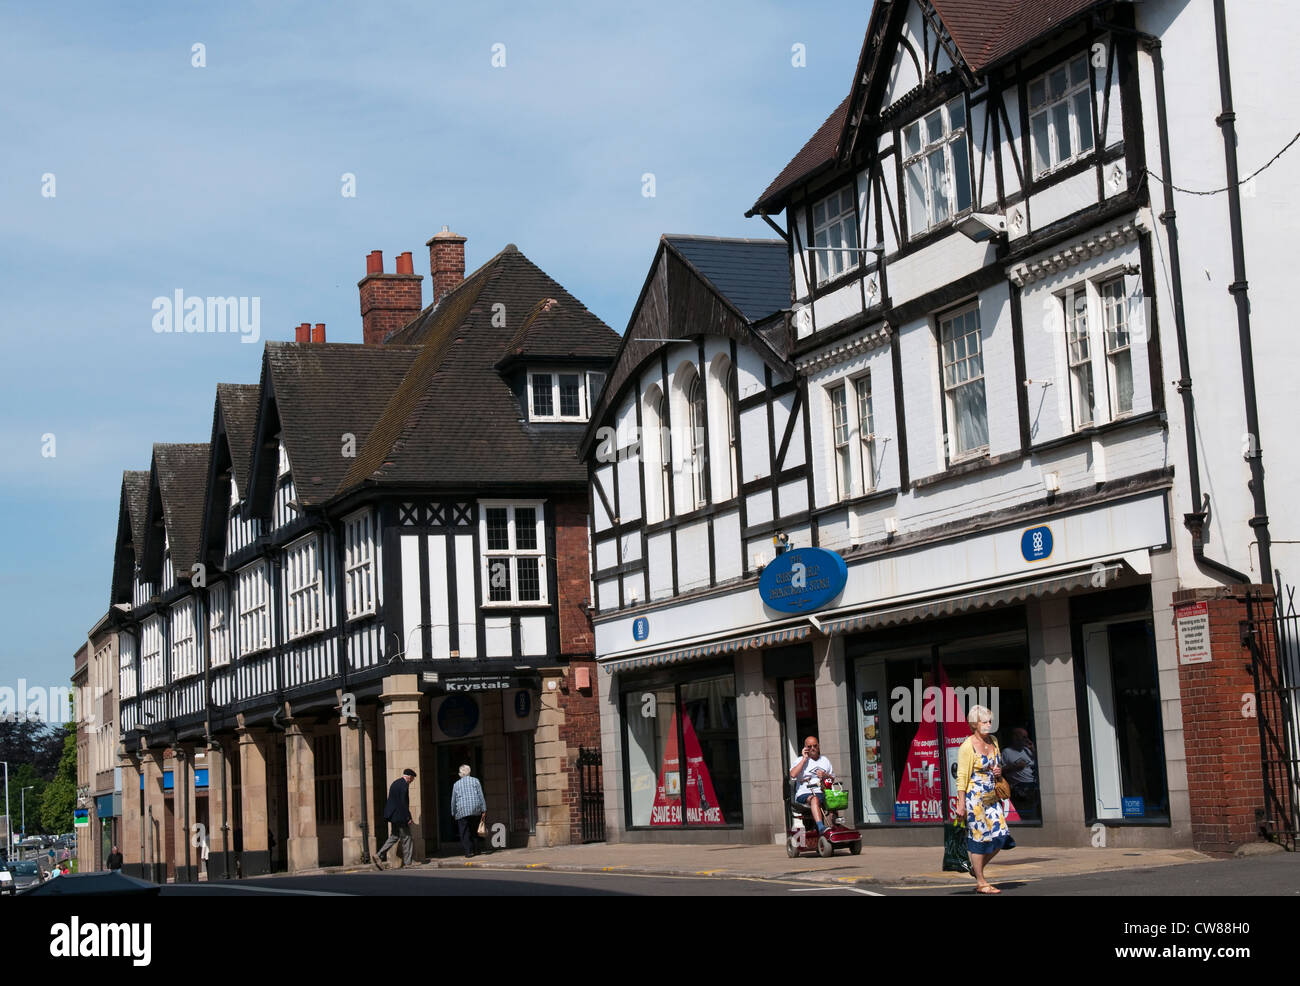 Timber framed Tudor style buildings in Chesterfield town centre, Derbyshire England UK Stock Photo